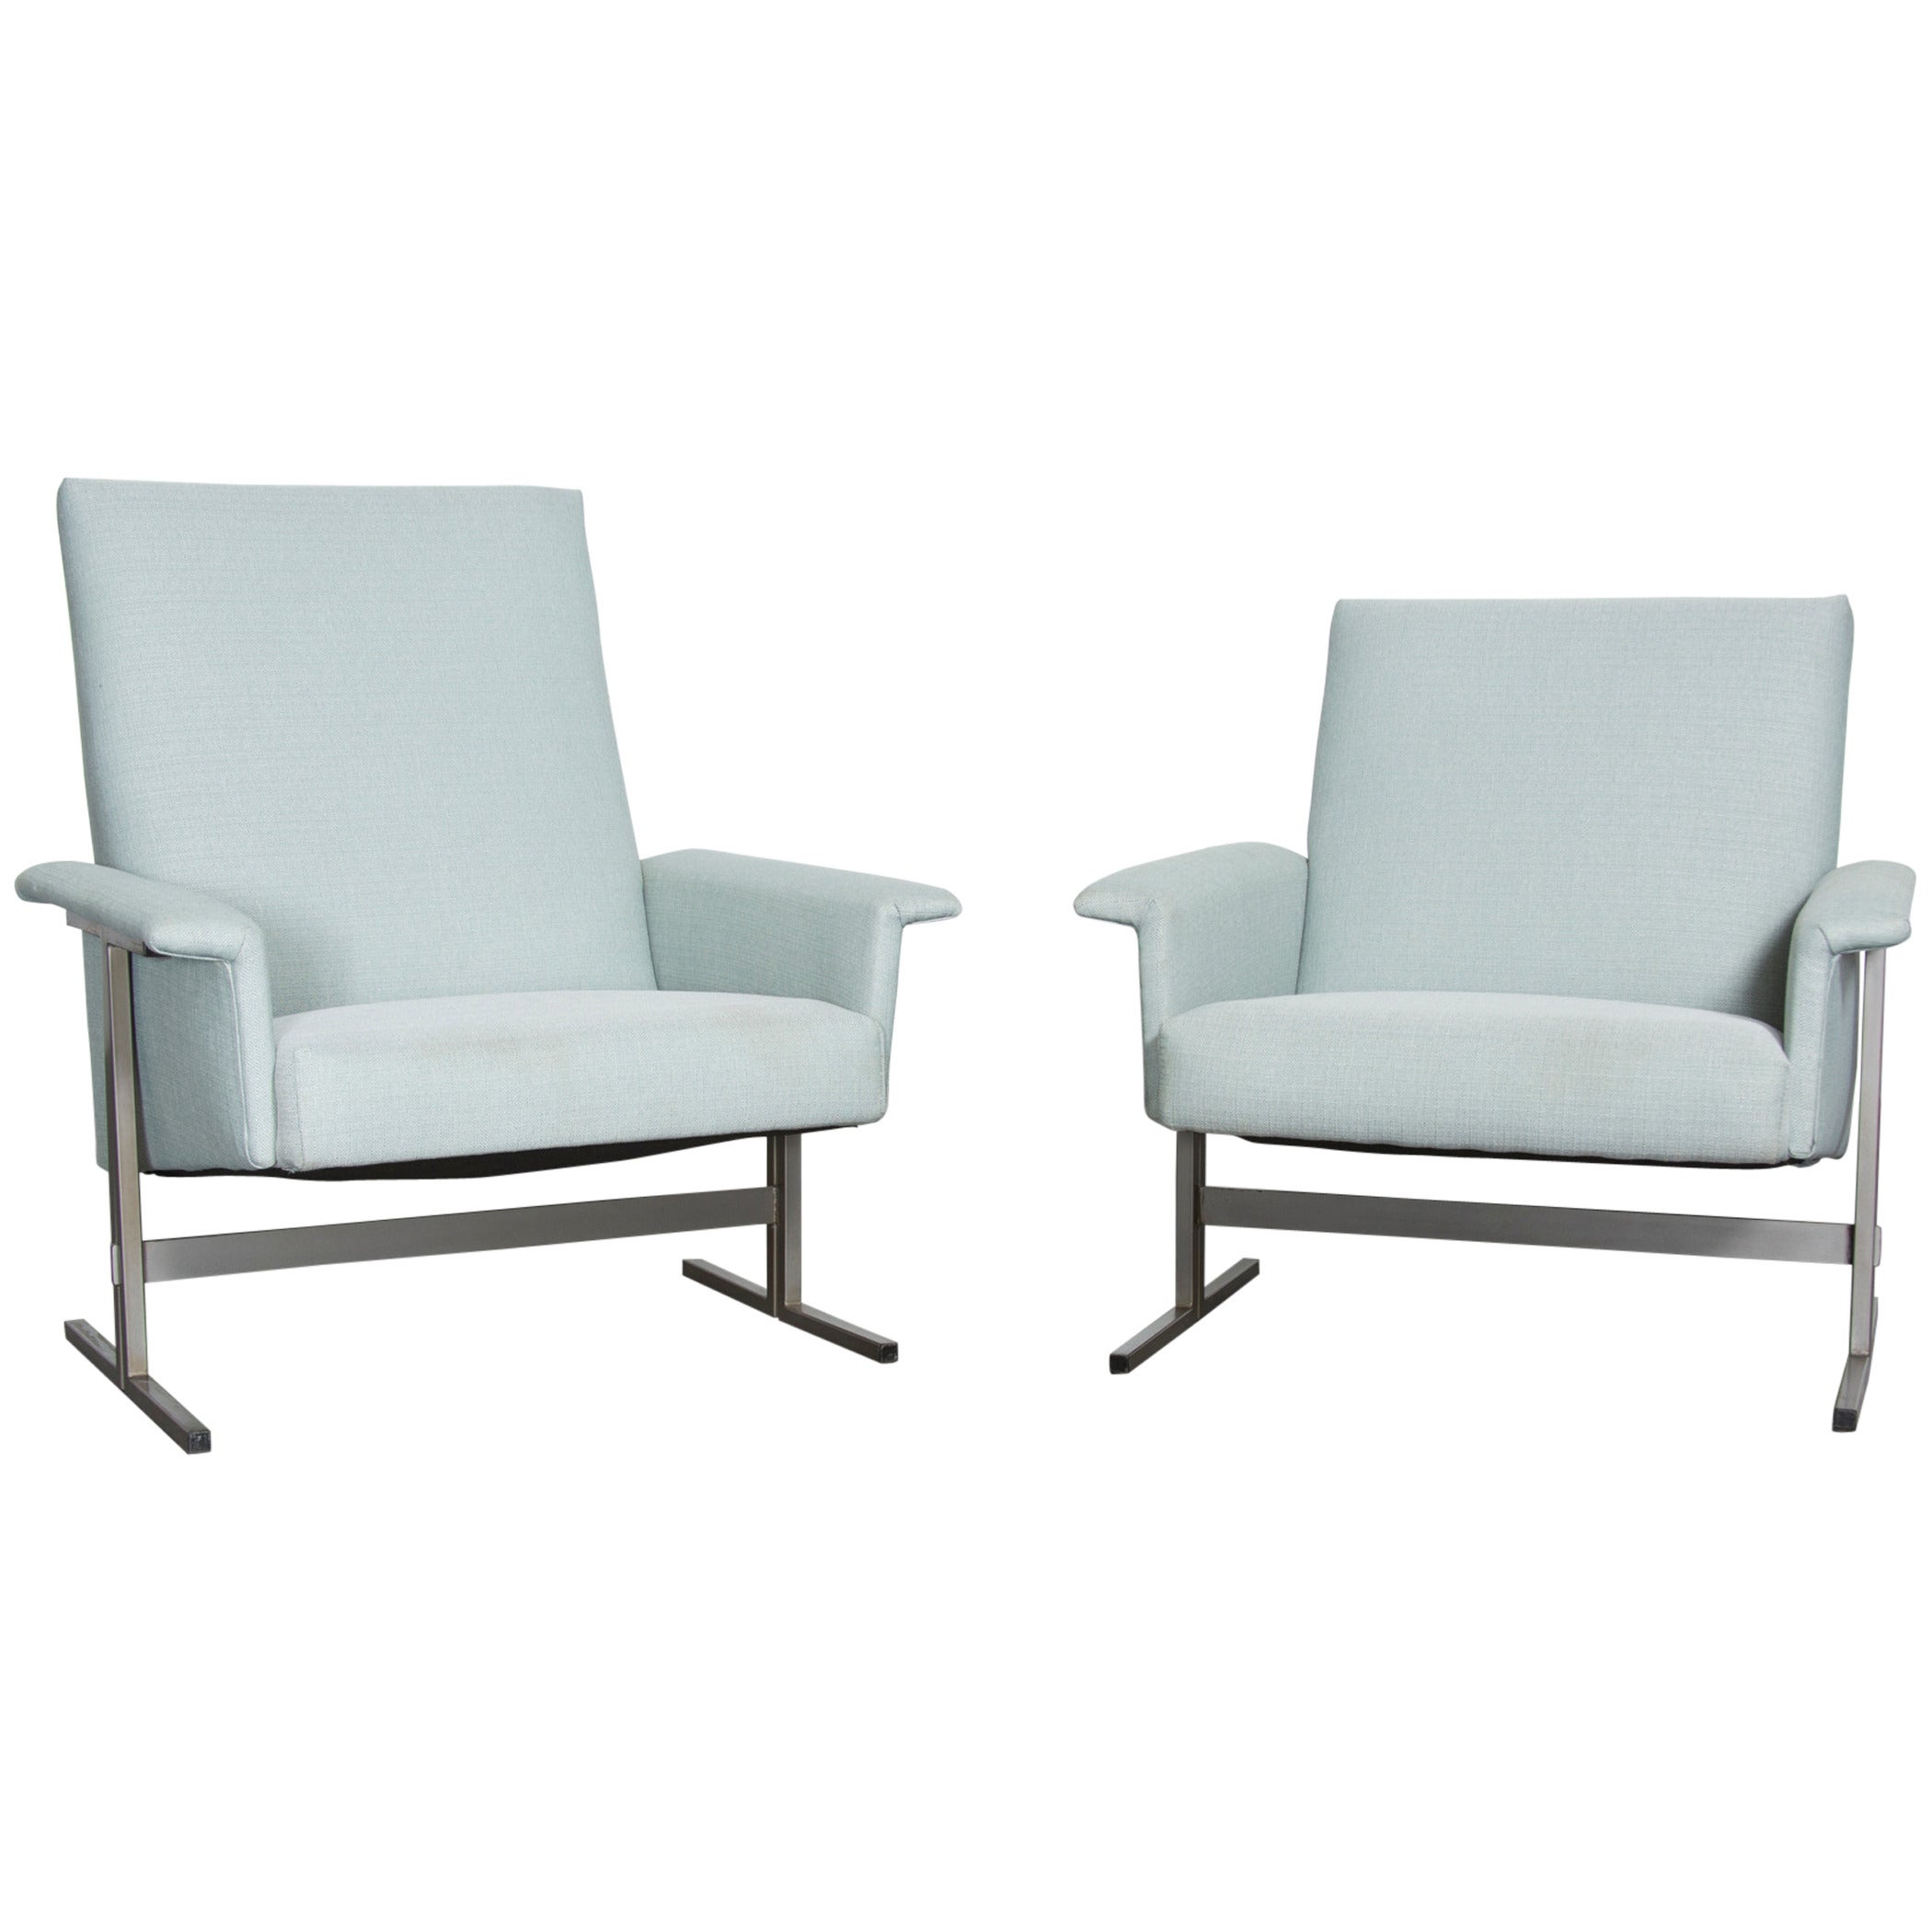 Pair of His and Her Kjaerholm Style Lounge Chairs